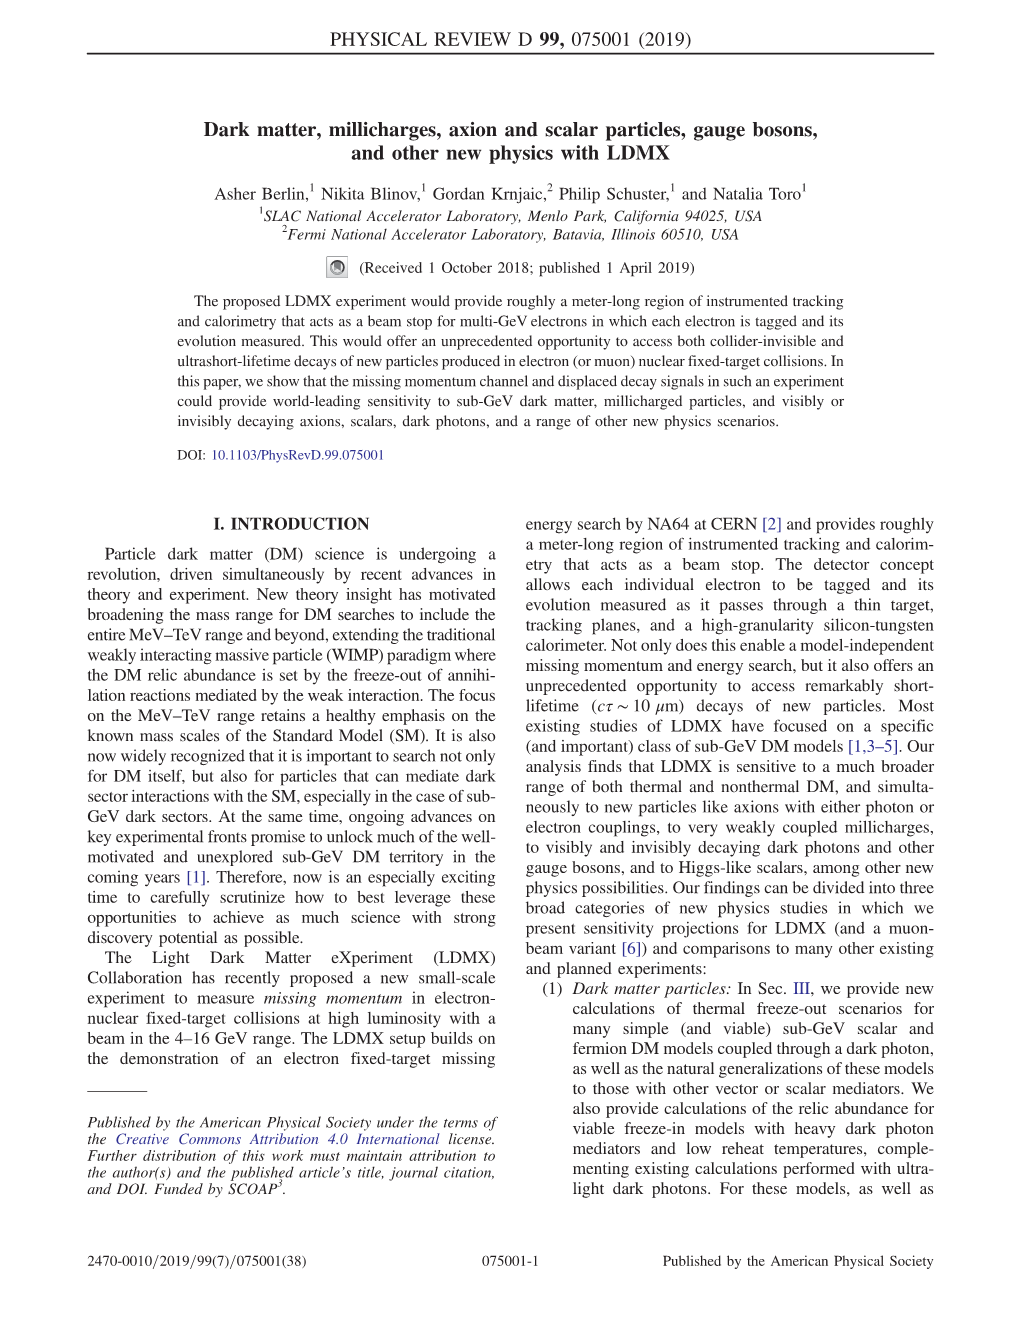 Dark Matter, Millicharges, Axion and Scalar Particles, Gauge Bosons, and Other New Physics with LDMX